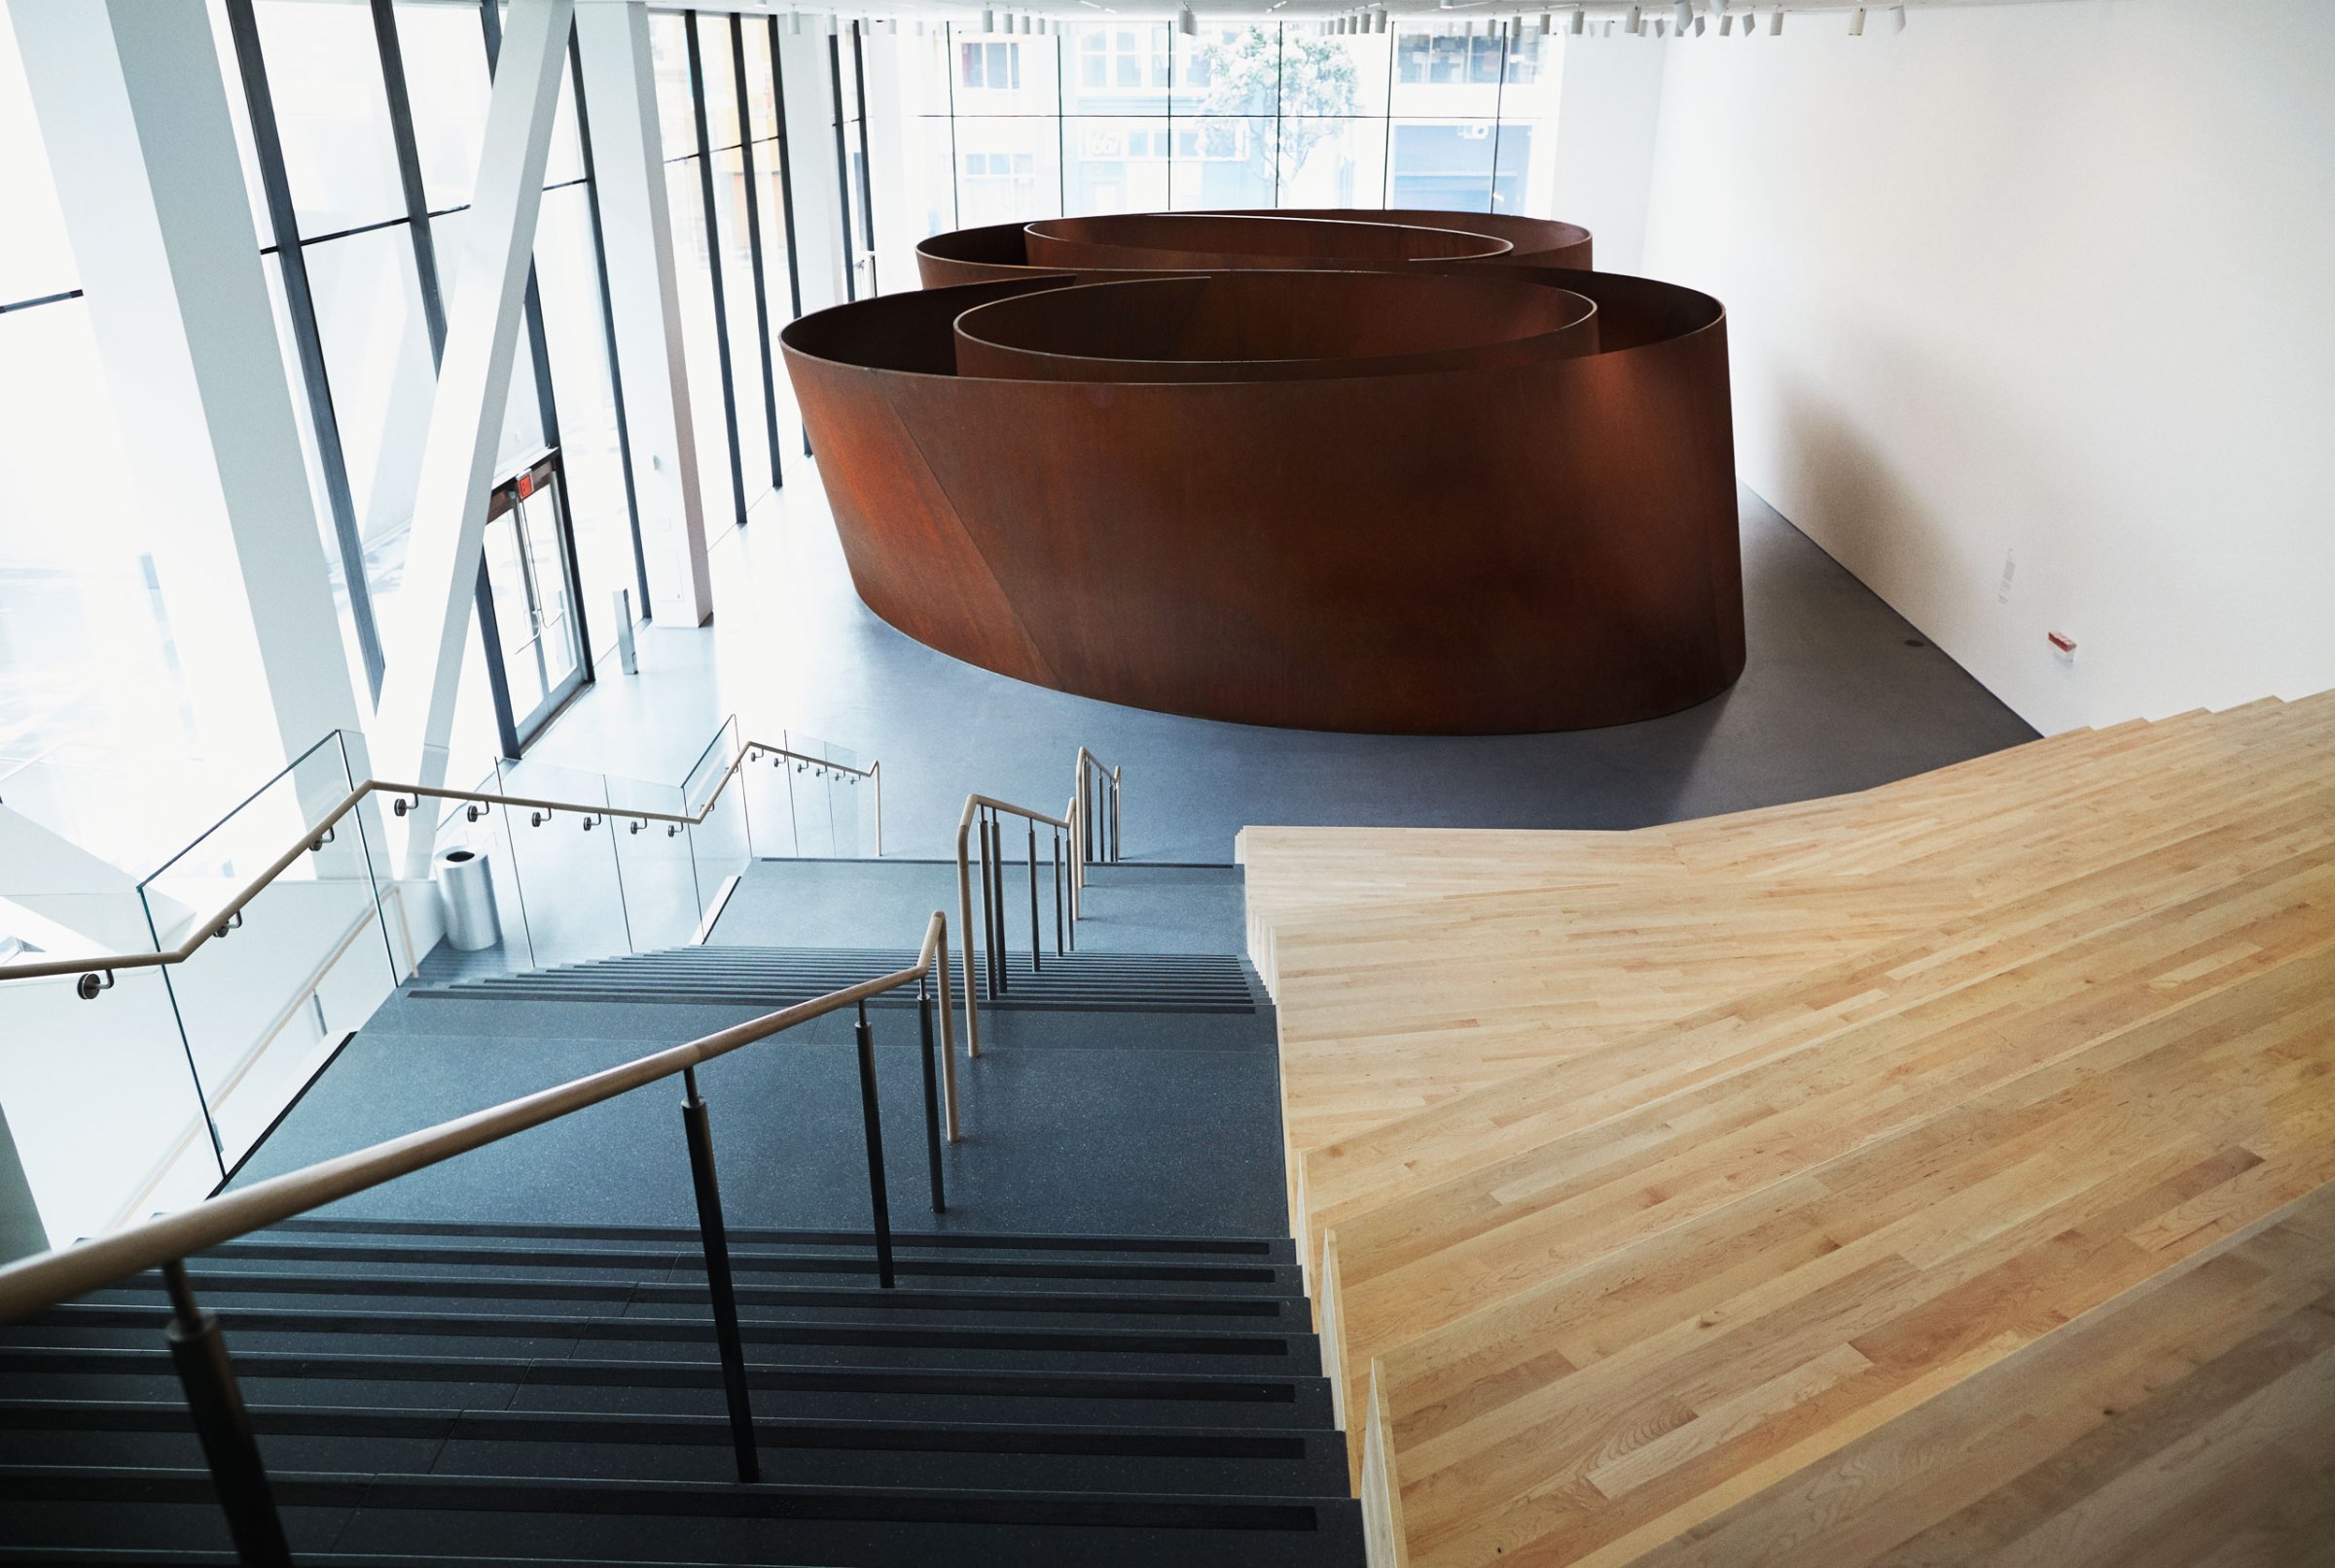 The Snøhetta addition gives Richard Serra’s Sequence, 2006, a room to itself